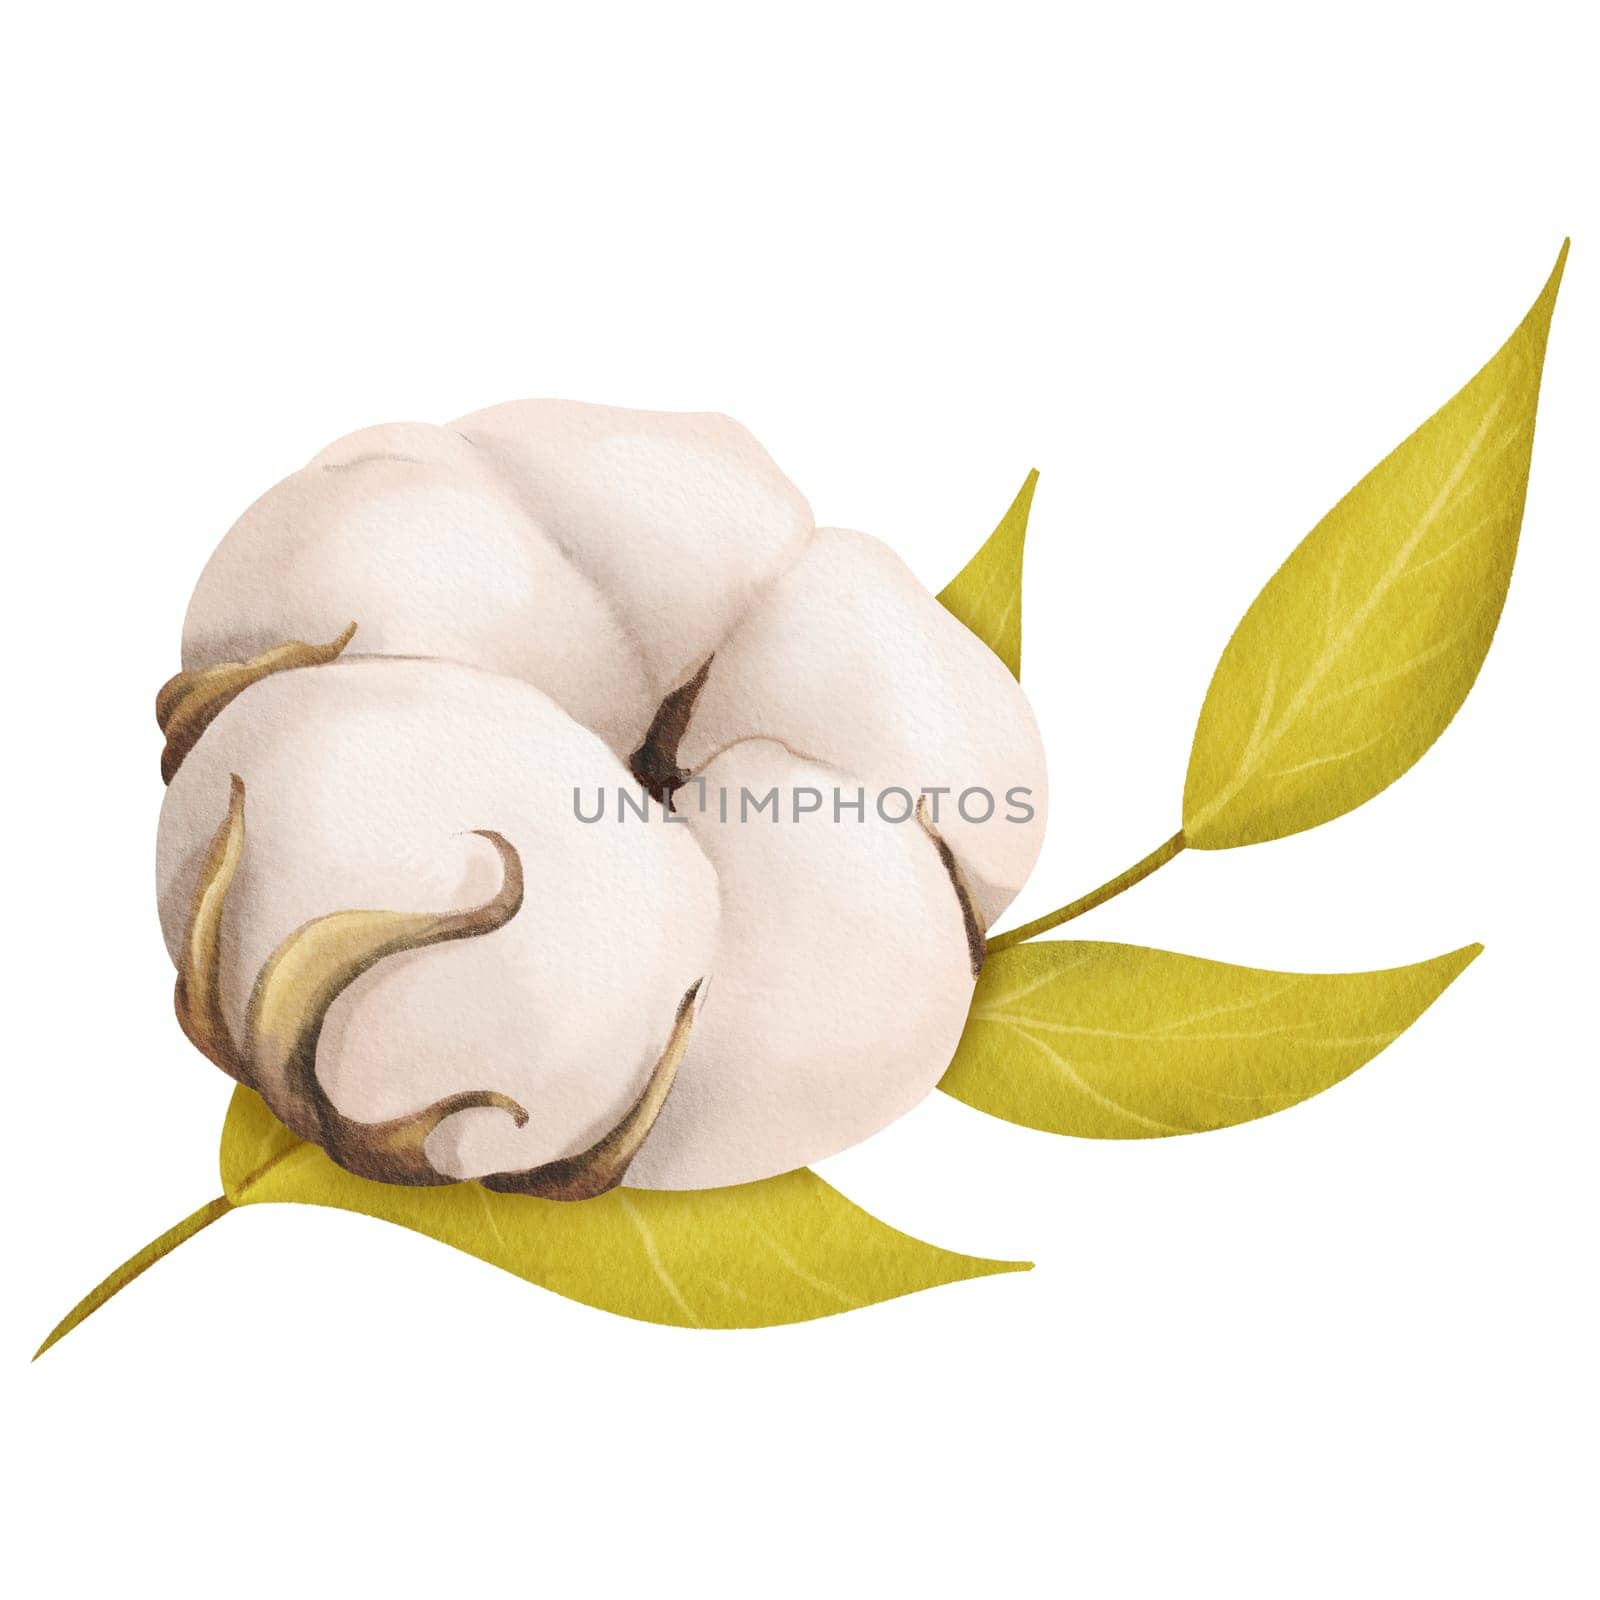 A composition featuring a delicate white cotton flower and a green branch. for botanical illustrations floral arrangements spring nature-themed designs, or eco-friendly projects. Watercolor